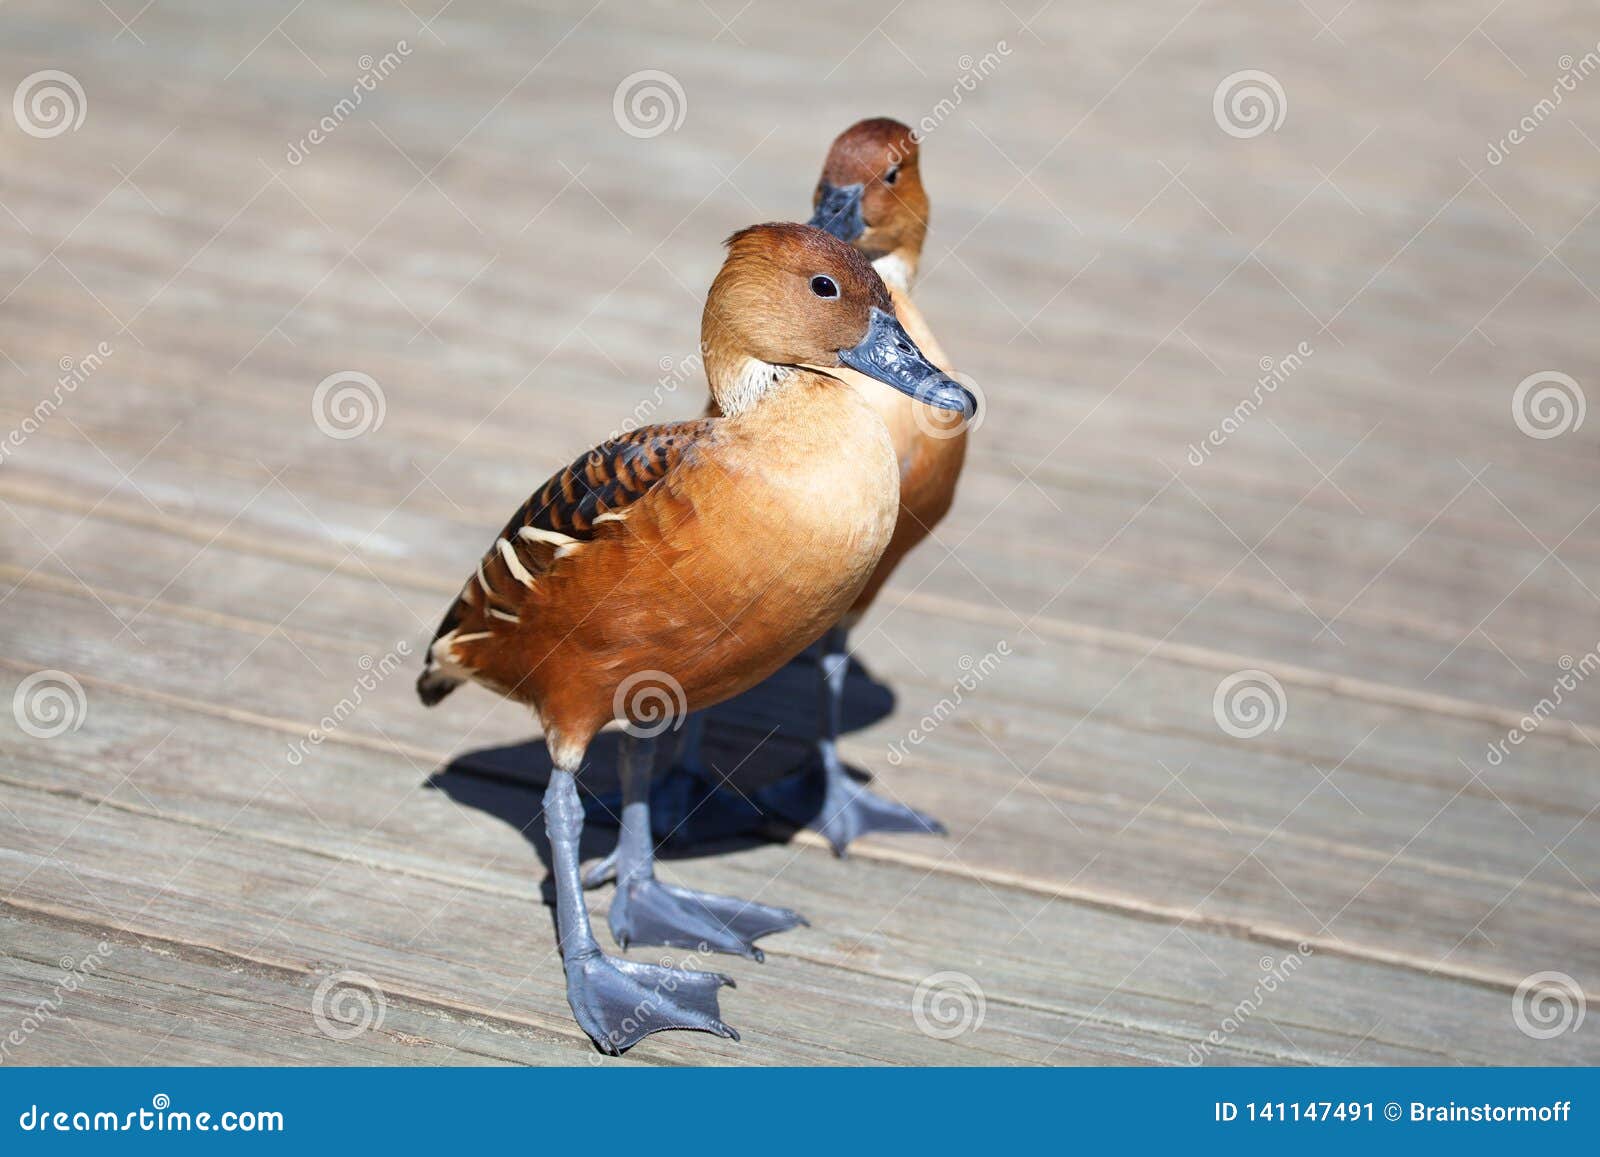 two dendrocygna bicolor whistling ducks fulvous color on wooden background close up